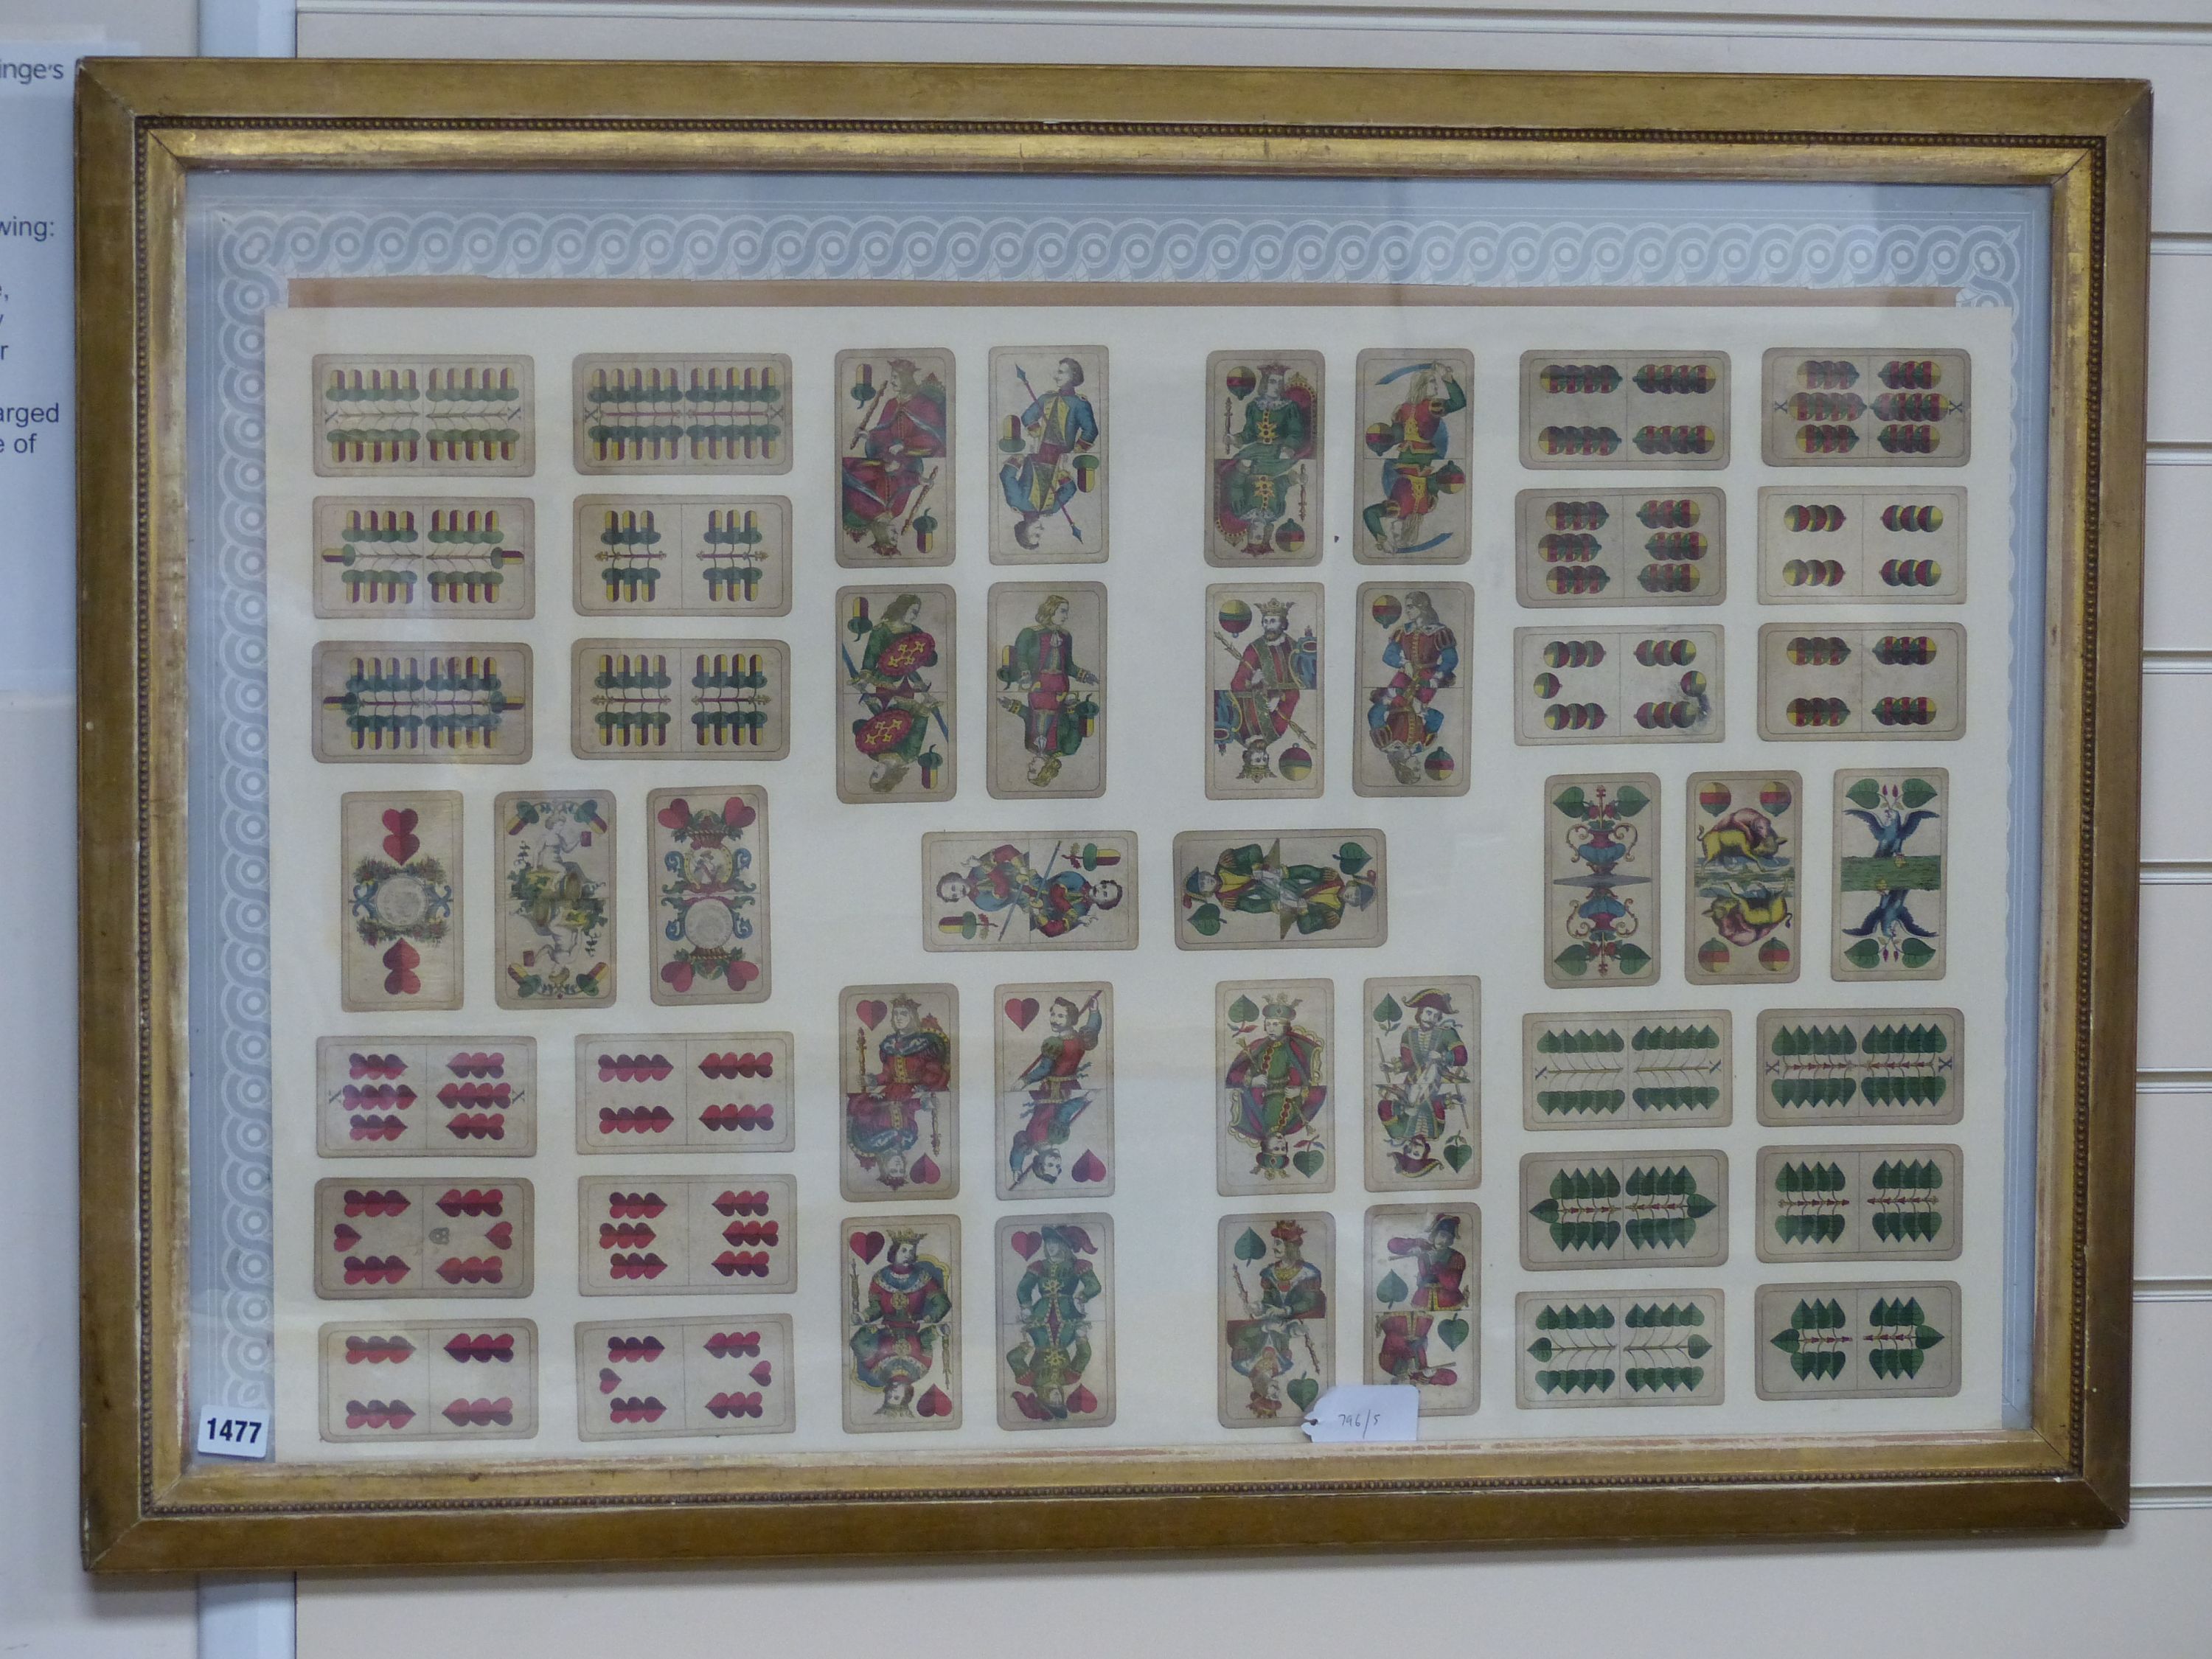 Framed 19th century playing cards